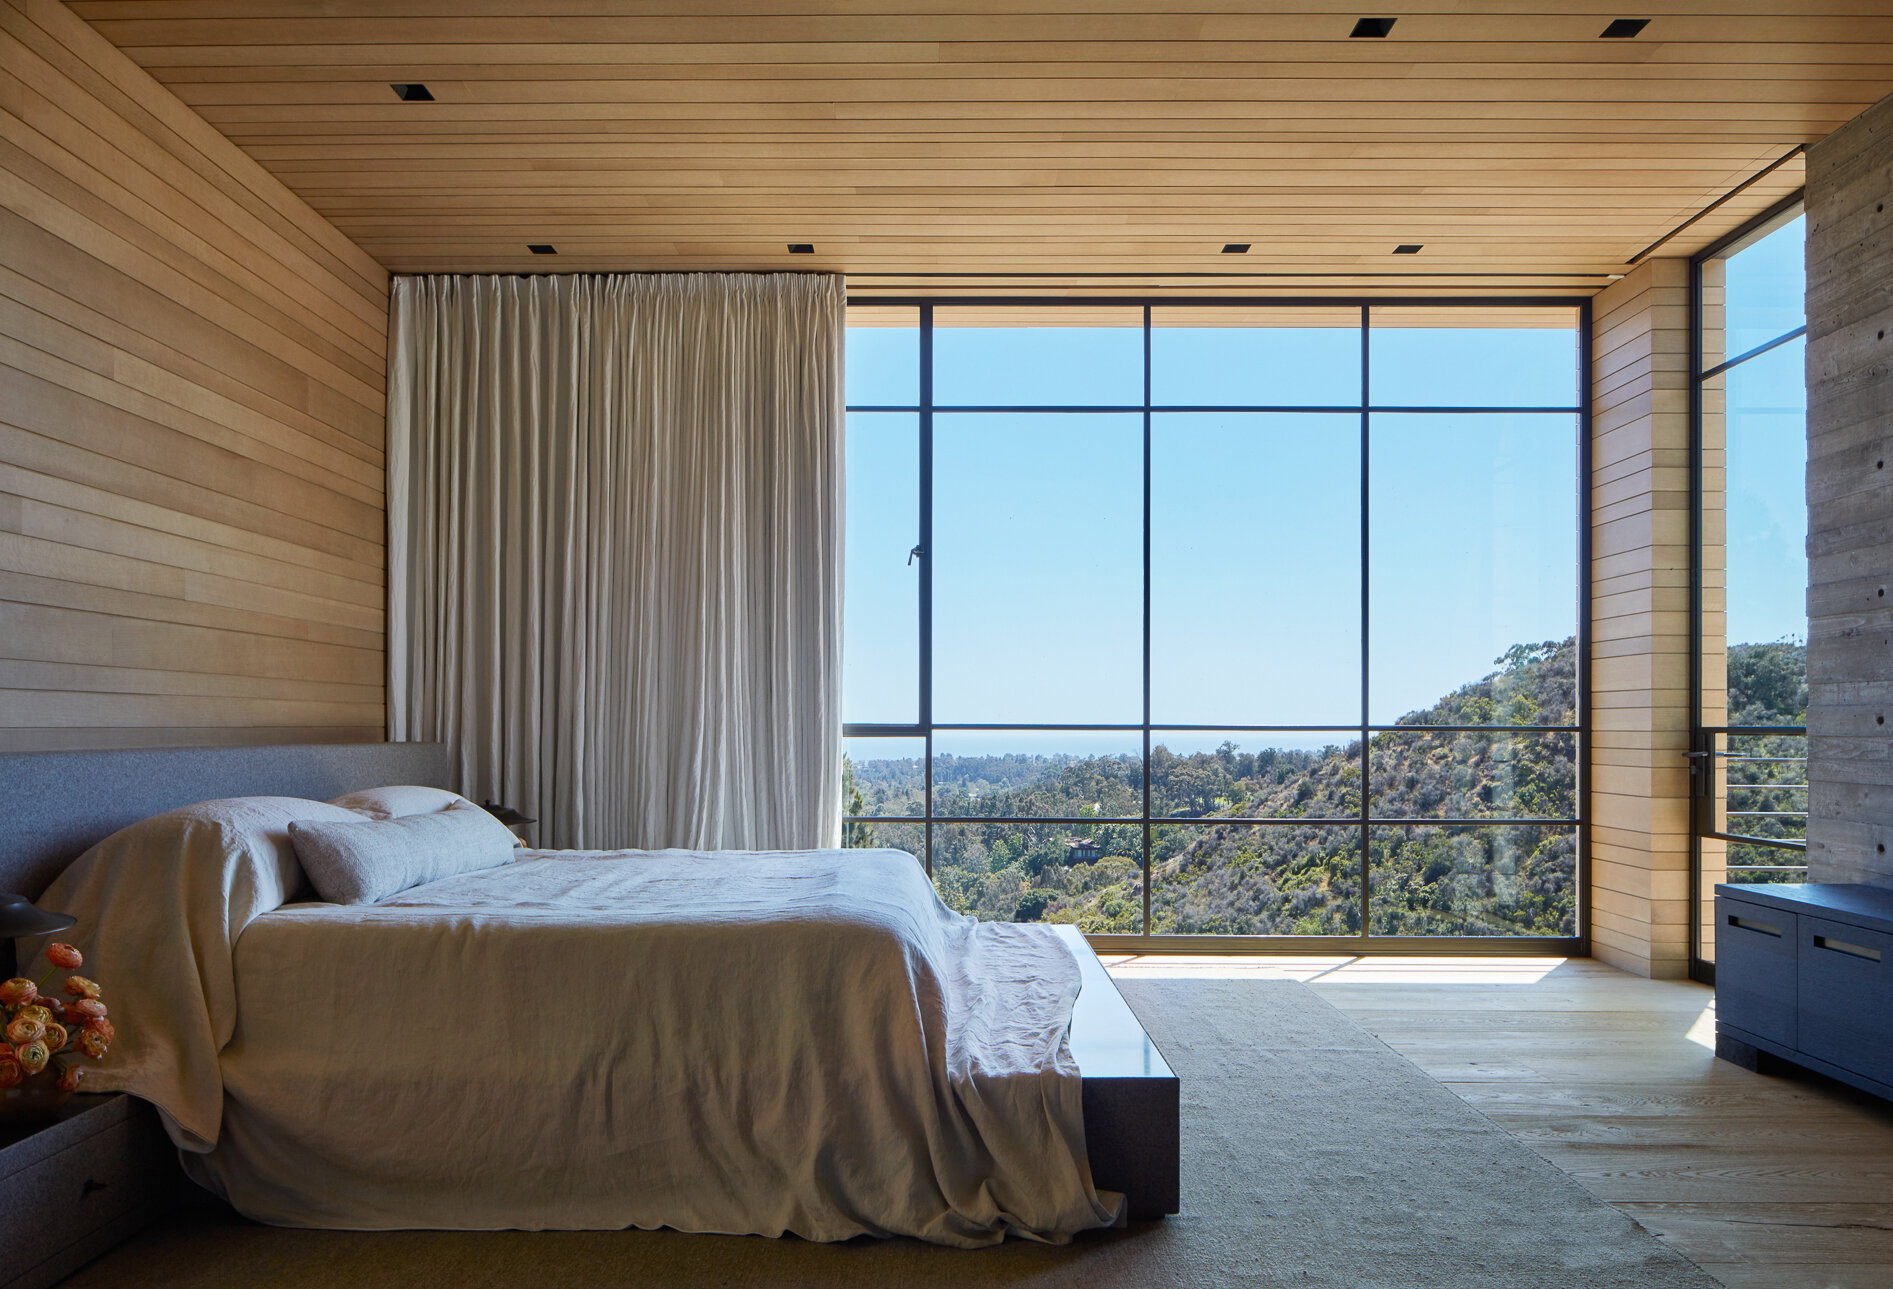  Custom luxury home general contractor built modern private residence in the Pacific Palisades neighborhood of Los Angeles featuring steel frame windows and wood panel walls with iconic views.  